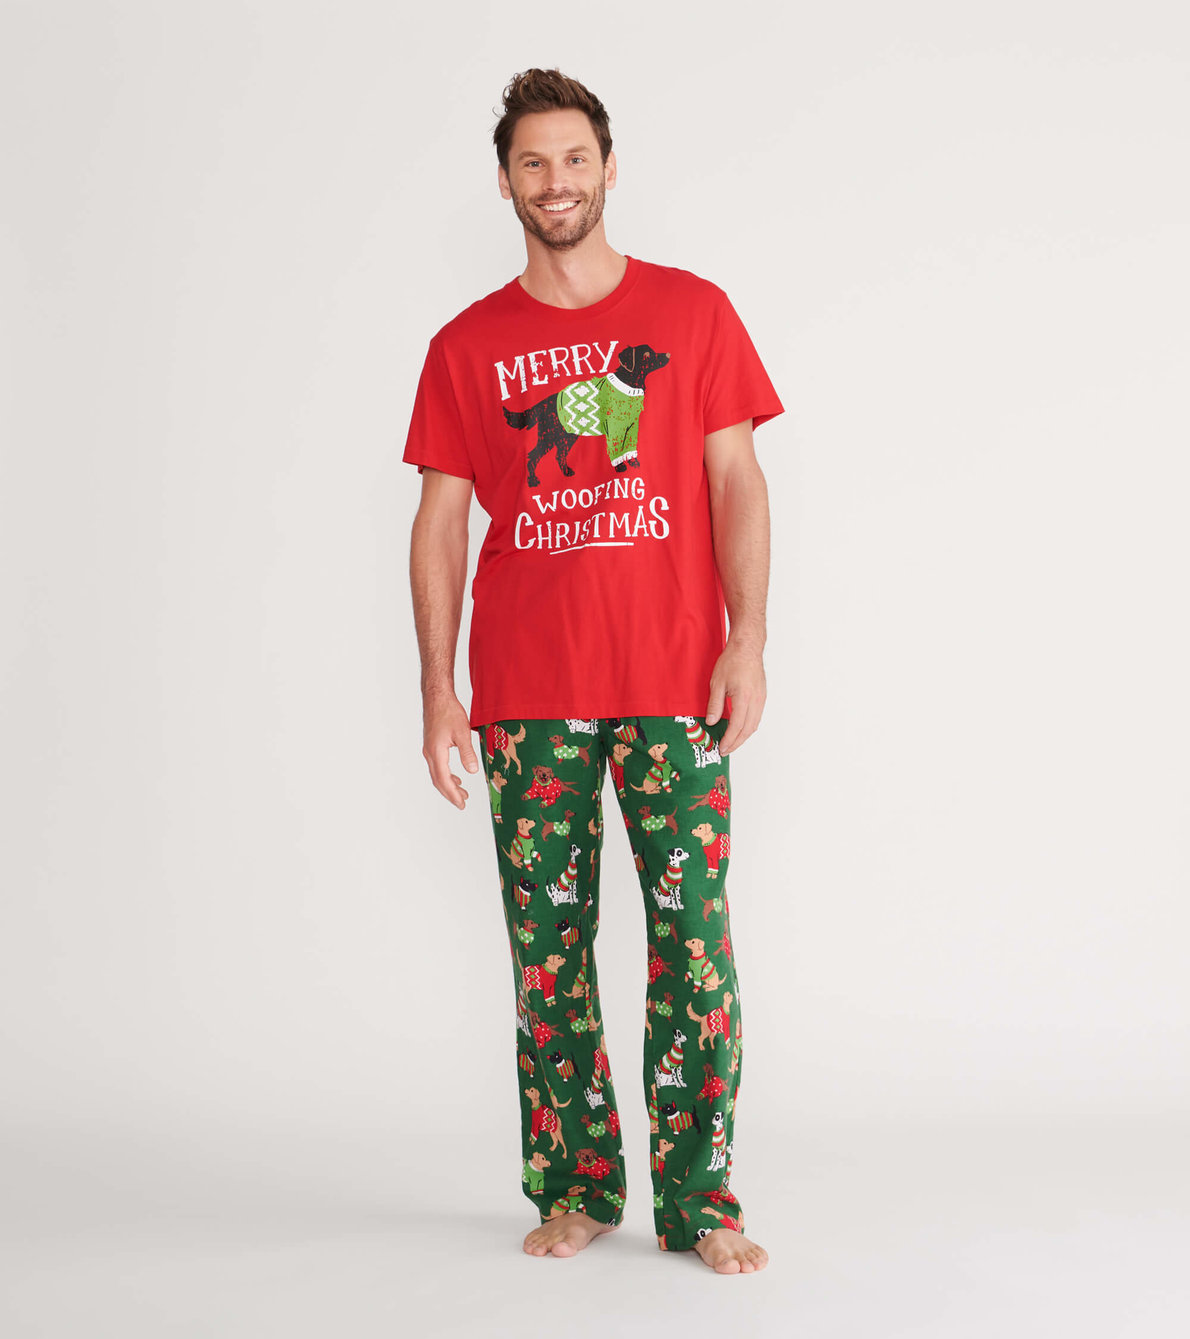 View larger image of Woofing Christmas Men's Tee